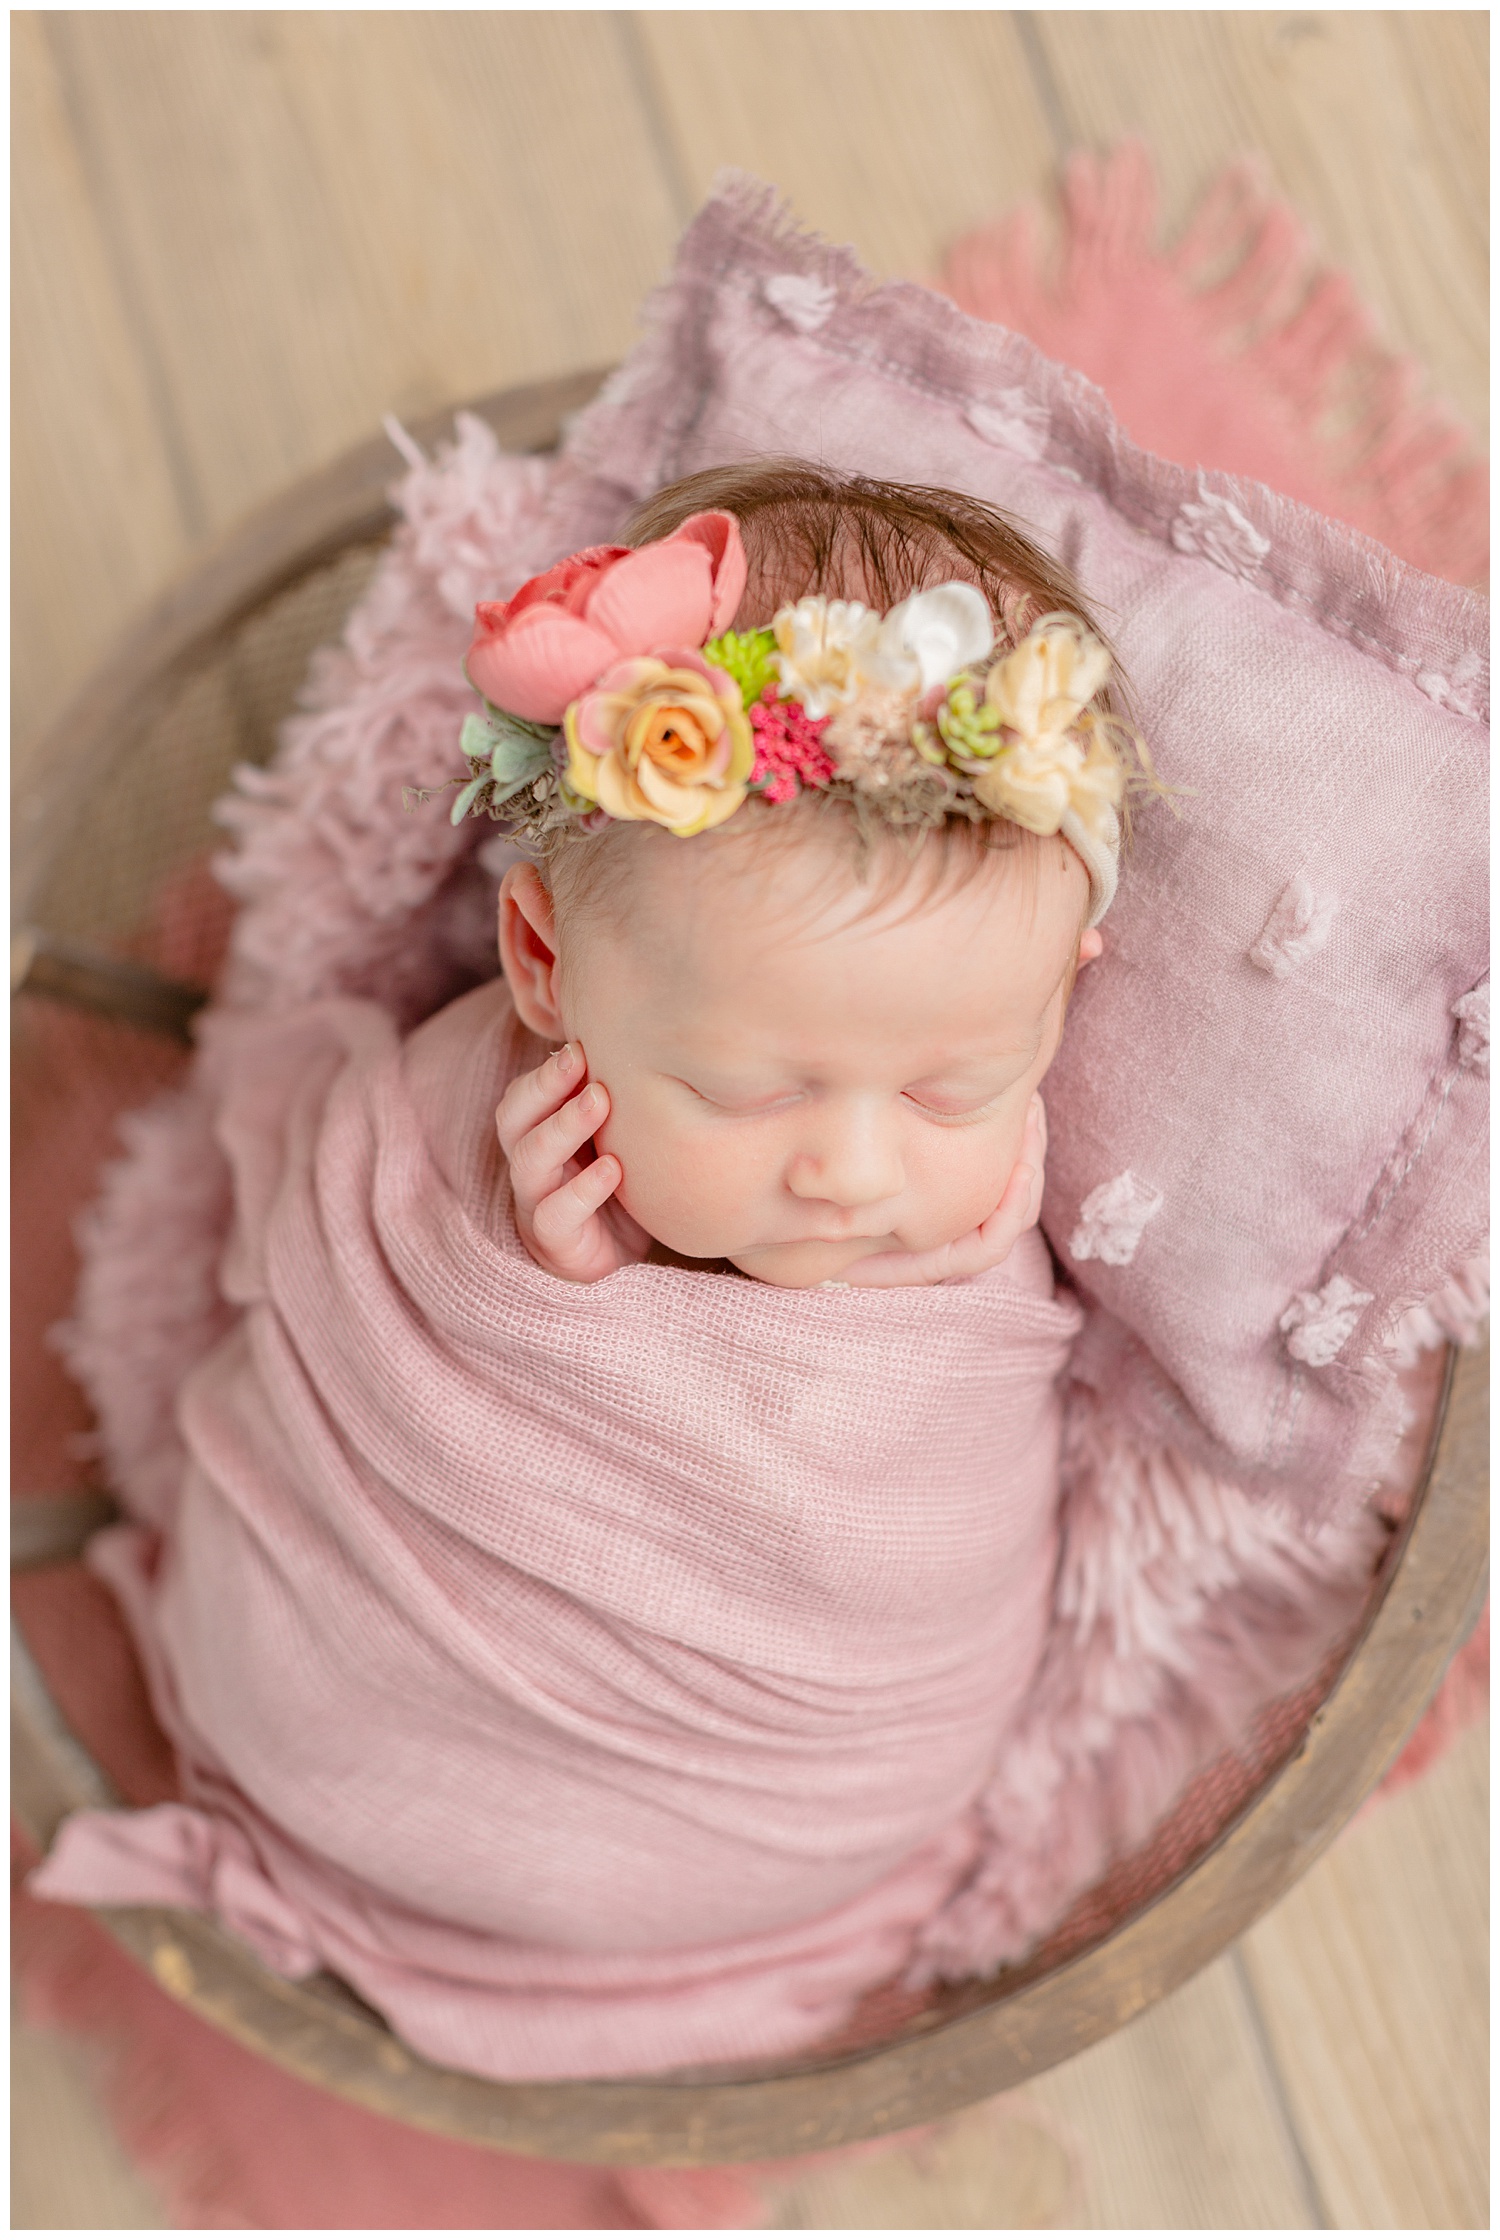 Newborn baby girl wrapped in a mauve colored stretch fabric snuggled in a basket bowl wearing a garden floral headband. | CB Studio